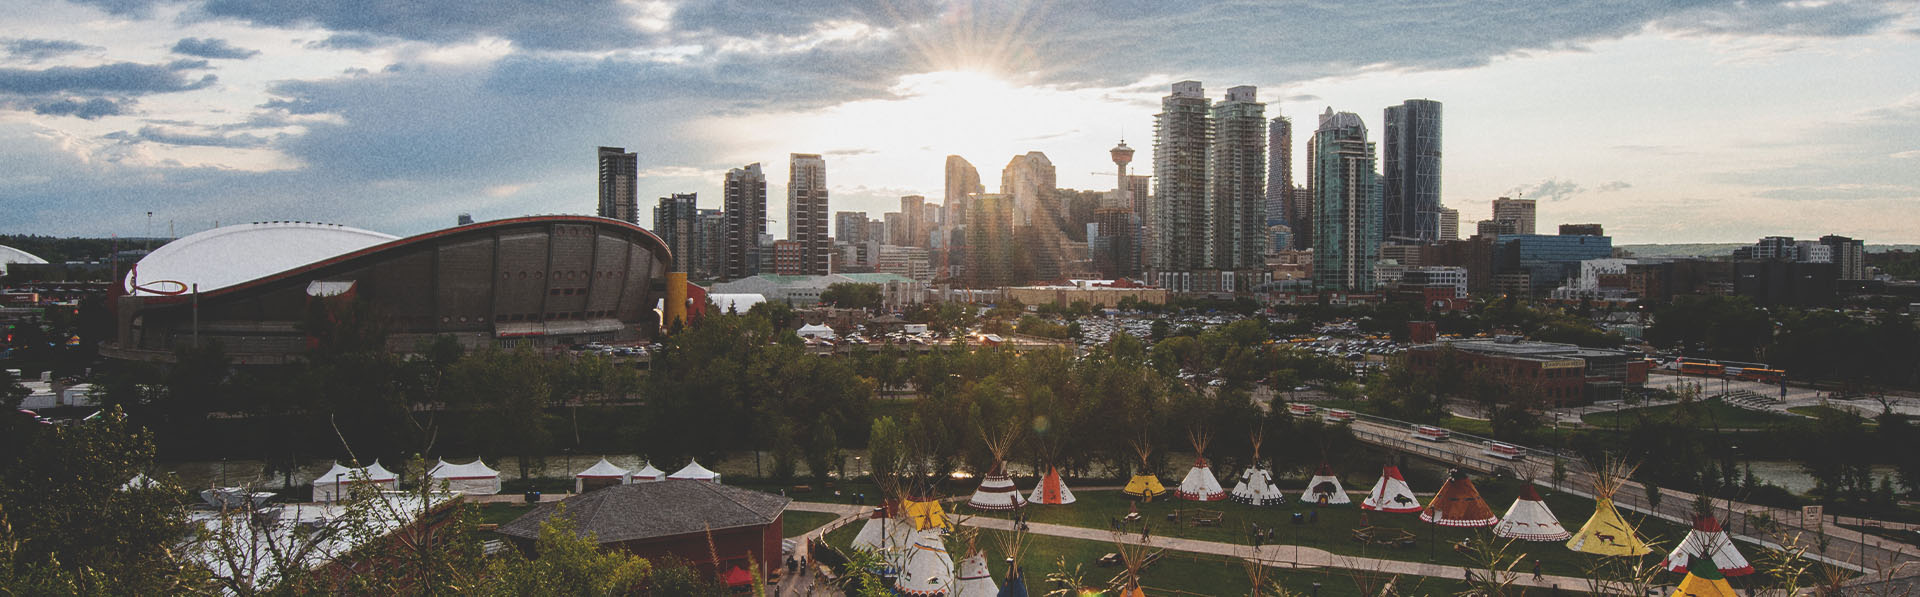 Elbow River Camp at Calgary Stampede with the Calgary skyline in the background